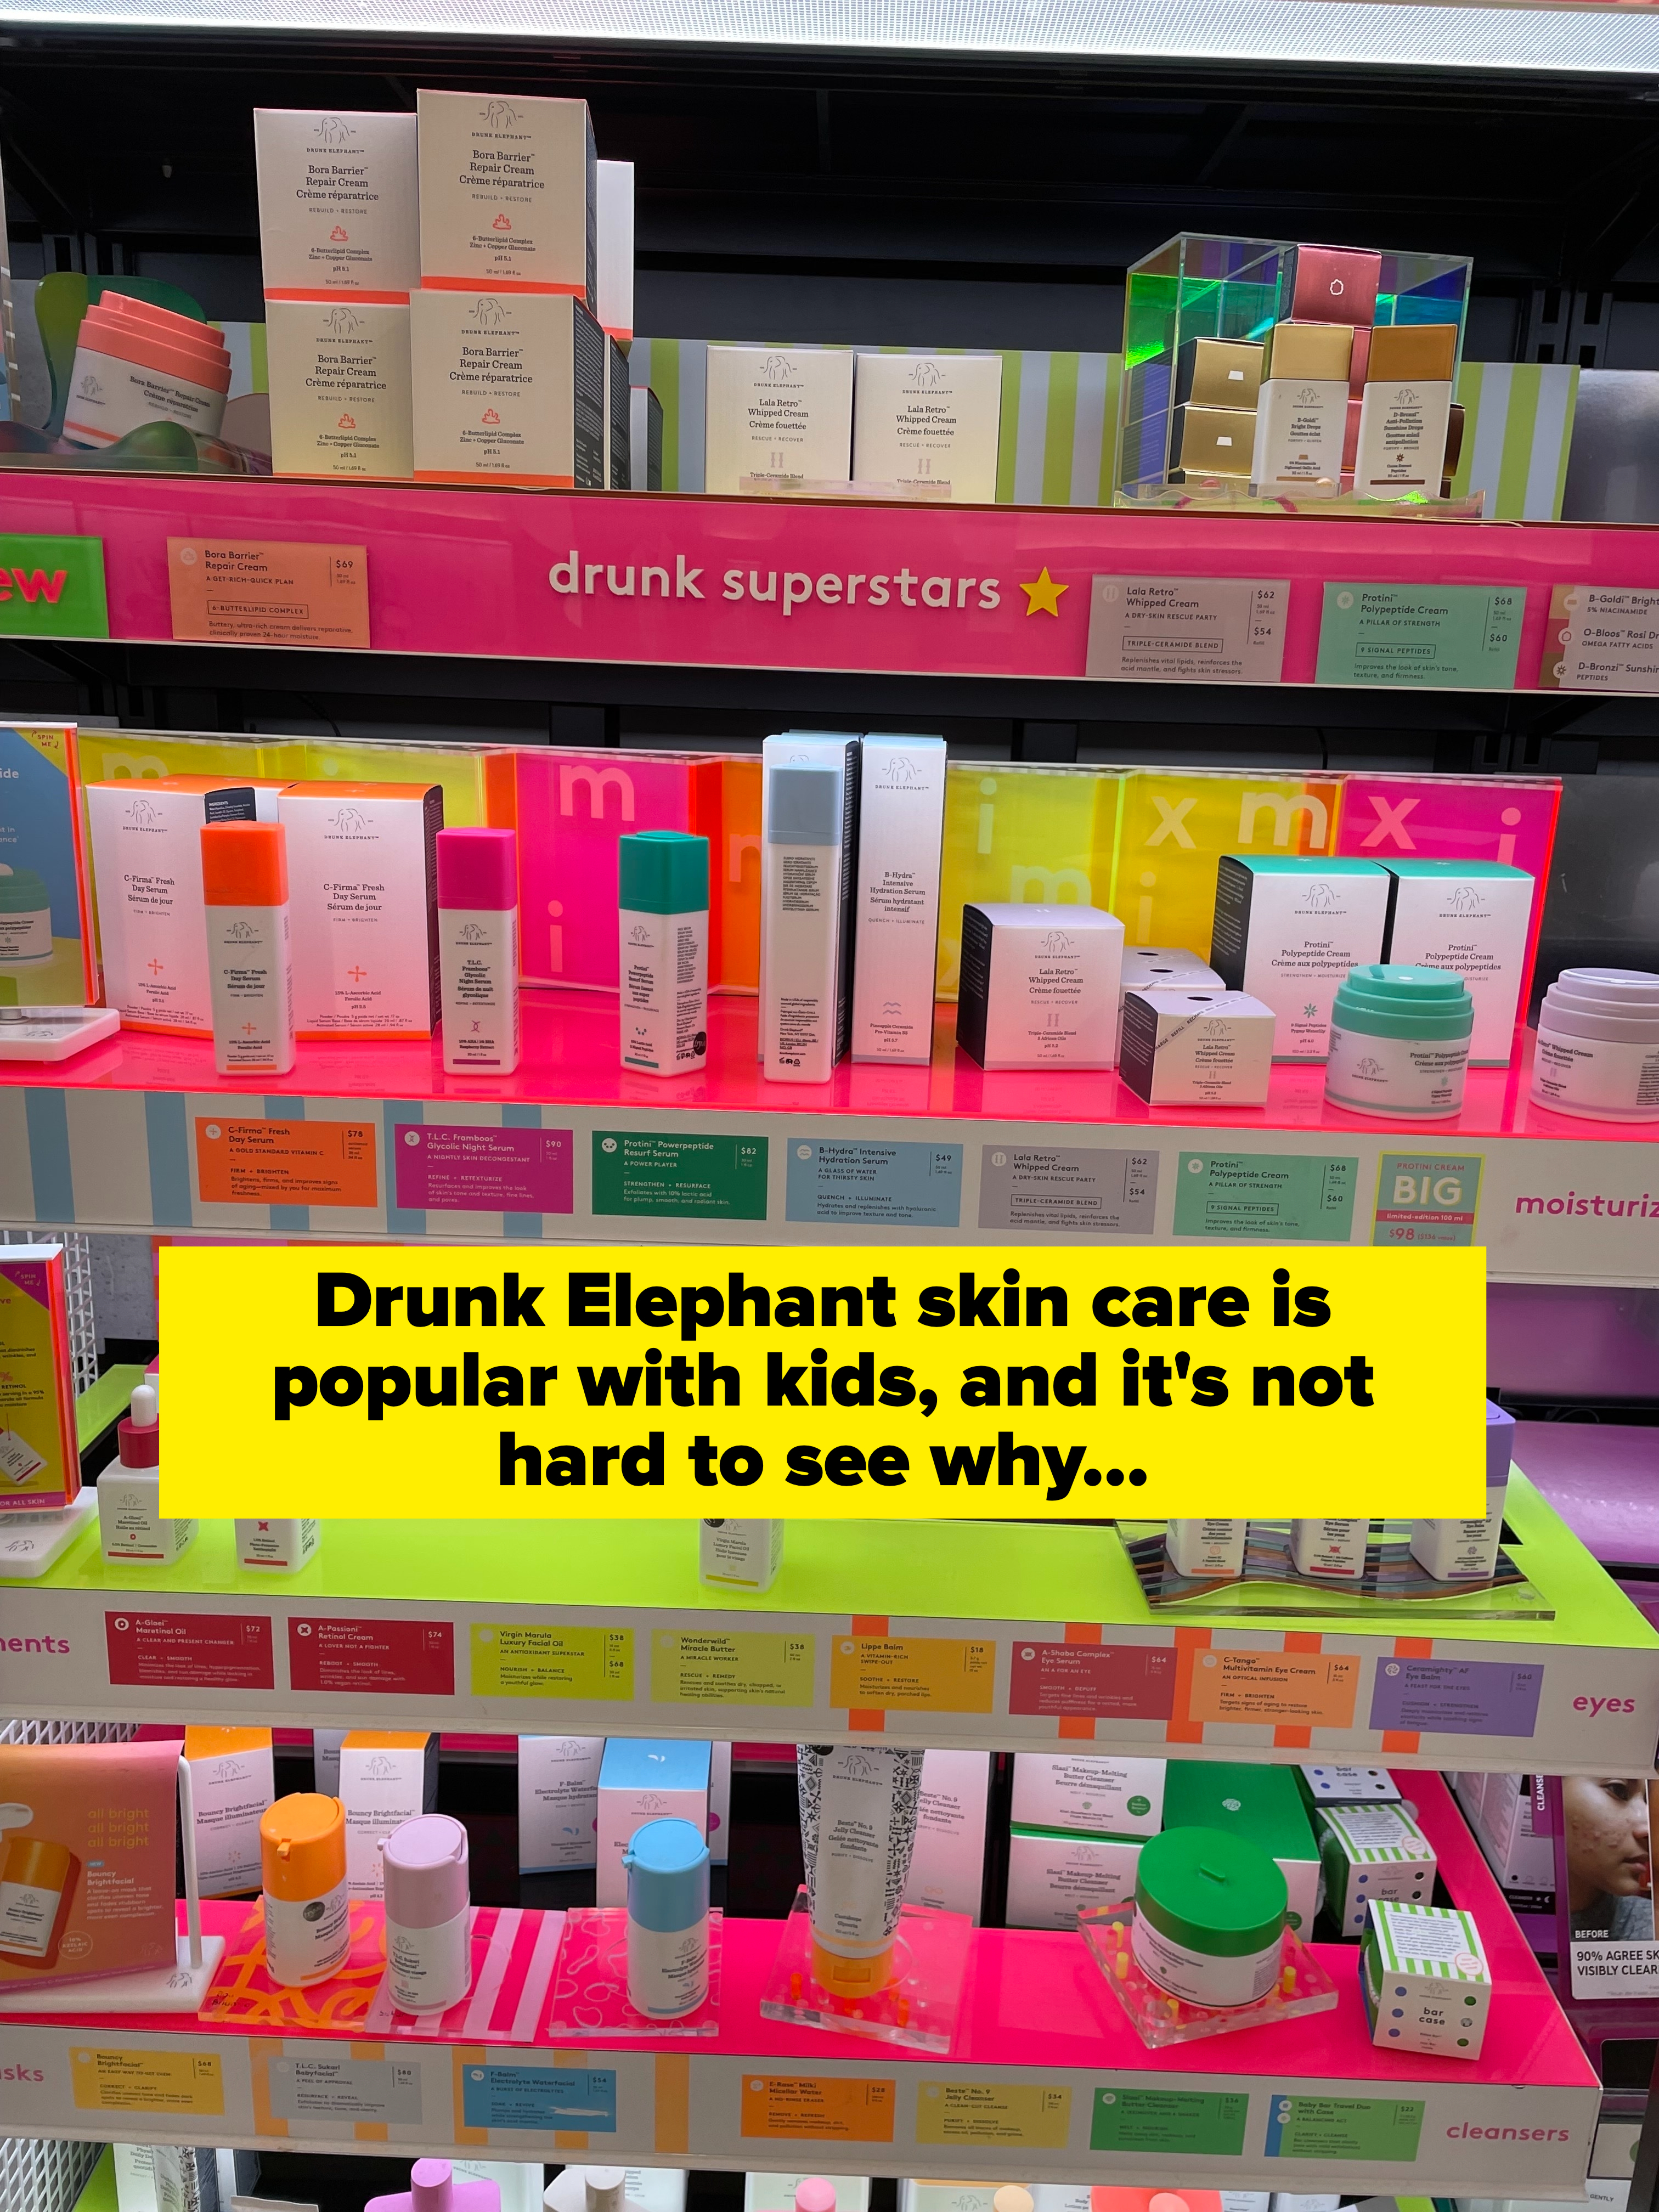 brighly colored drunk elephant display inside Sephora. Drunk elephant is popular with kids and it&#x27;s not hard to see why